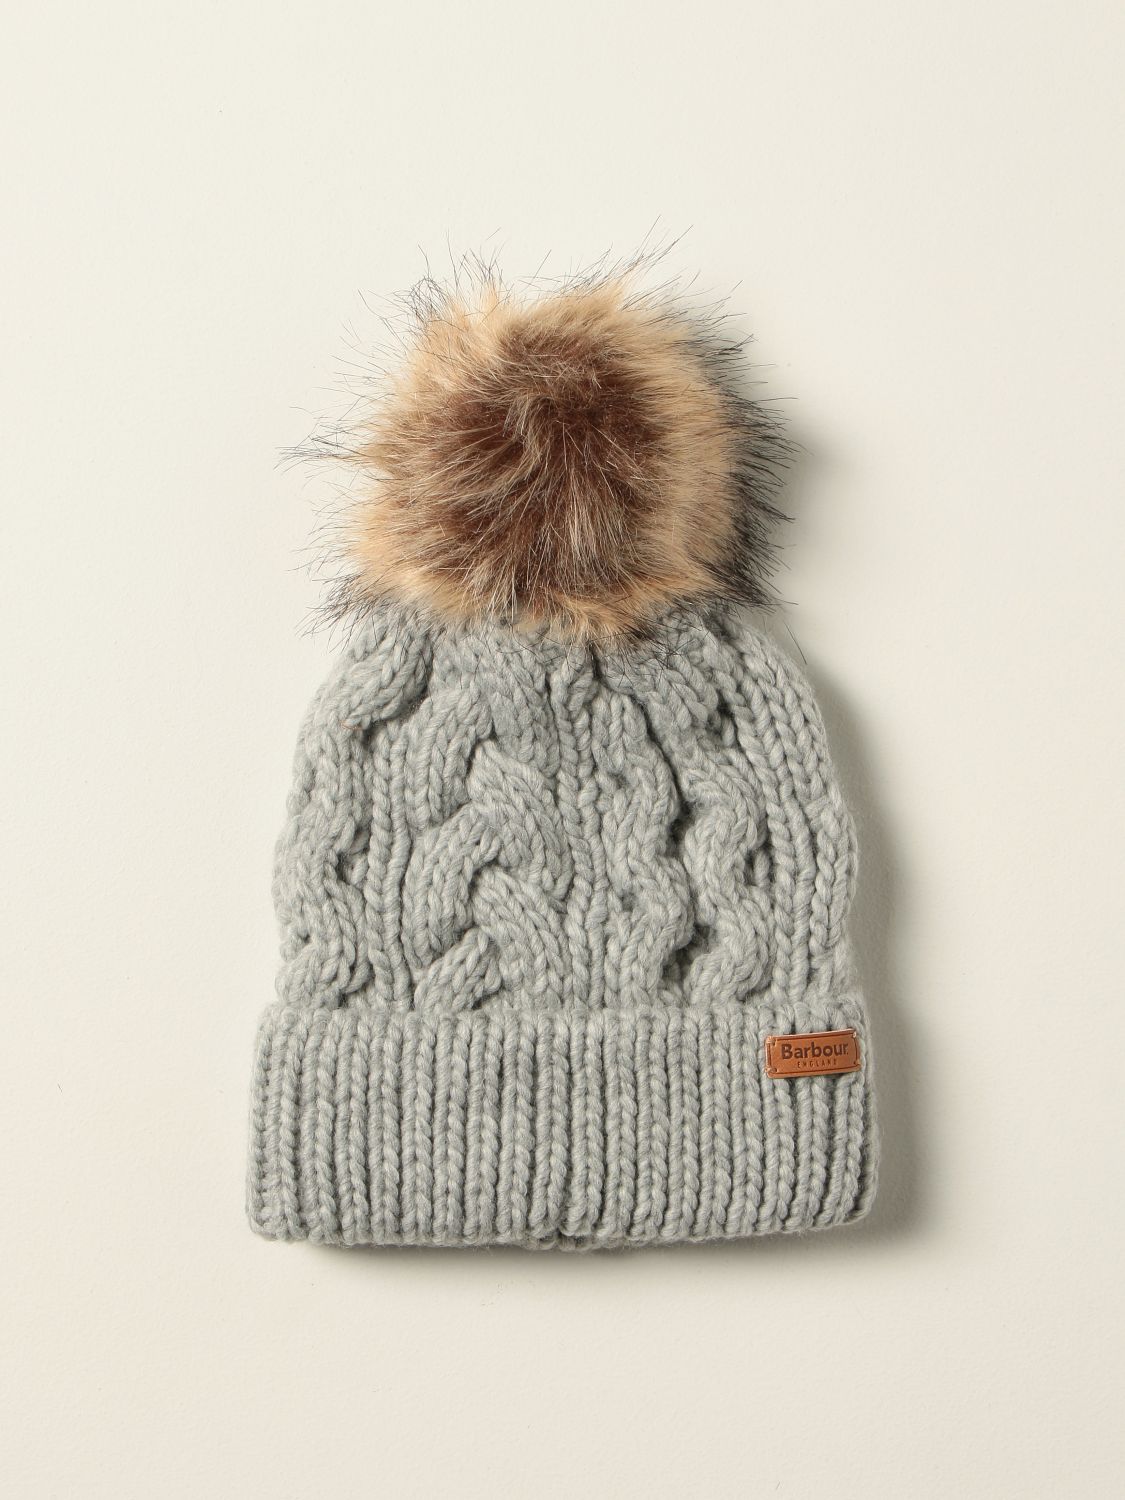 Hat Barbour: Braided Barbour beanie hat grey 1